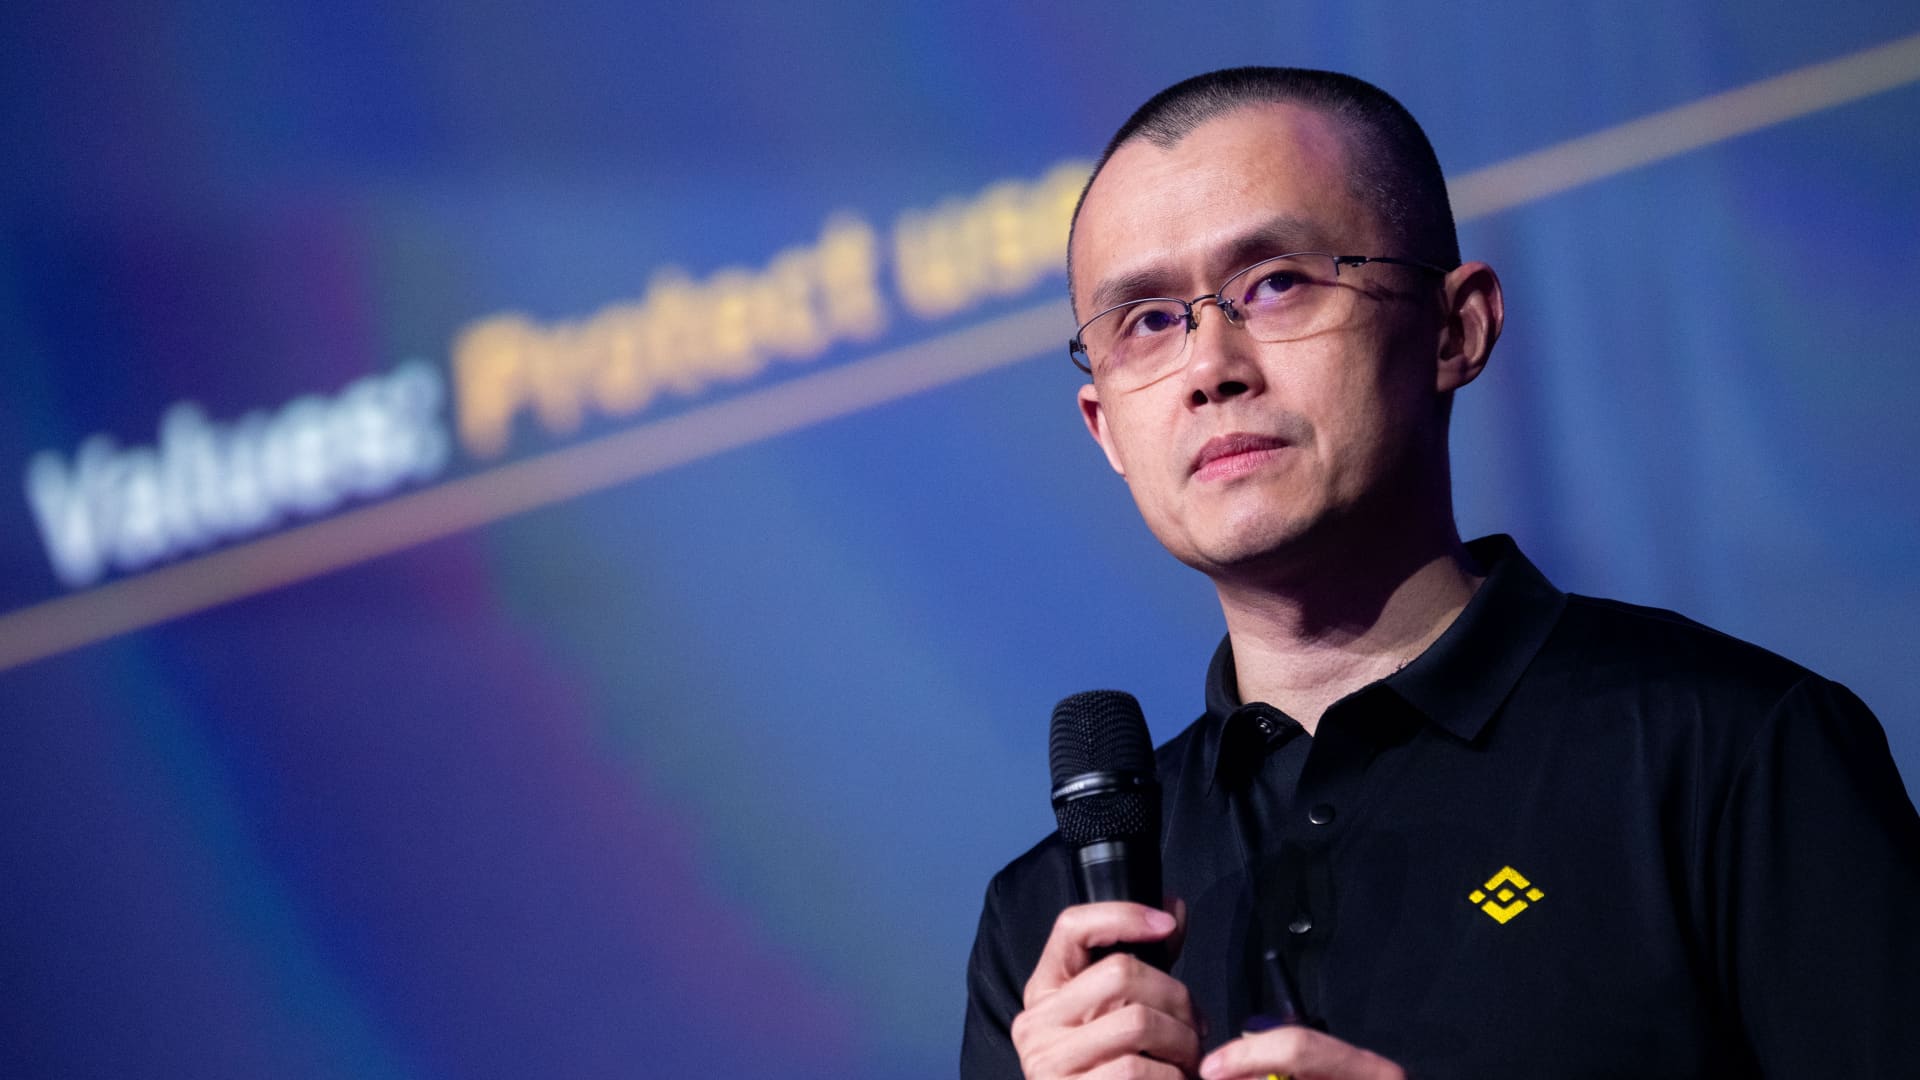 Binance CEO Changpeng Zhao pleads responsible to federal charges, steps down